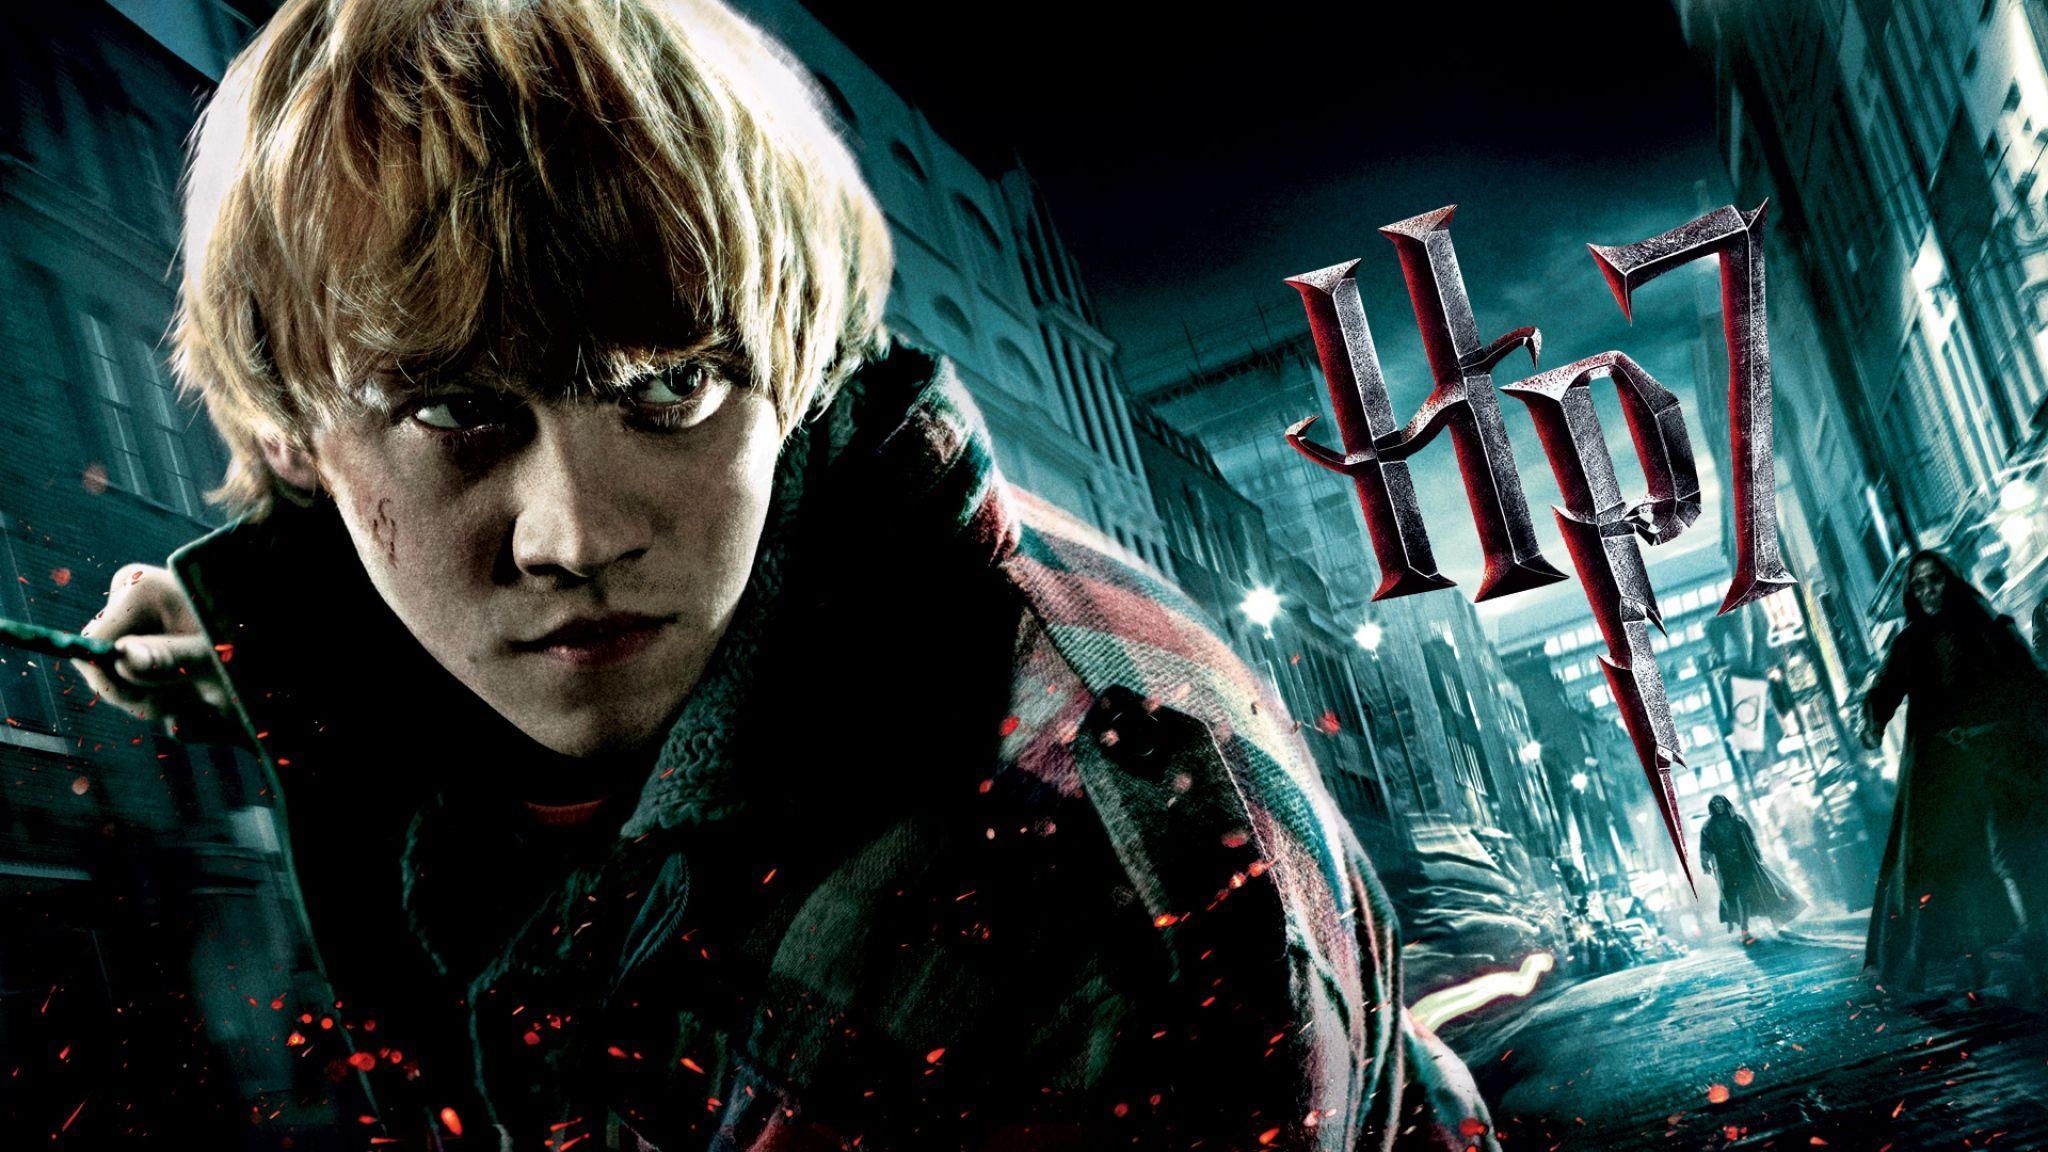 Download Wallpaper 2048x1152 Harry potter and the deathly hallows